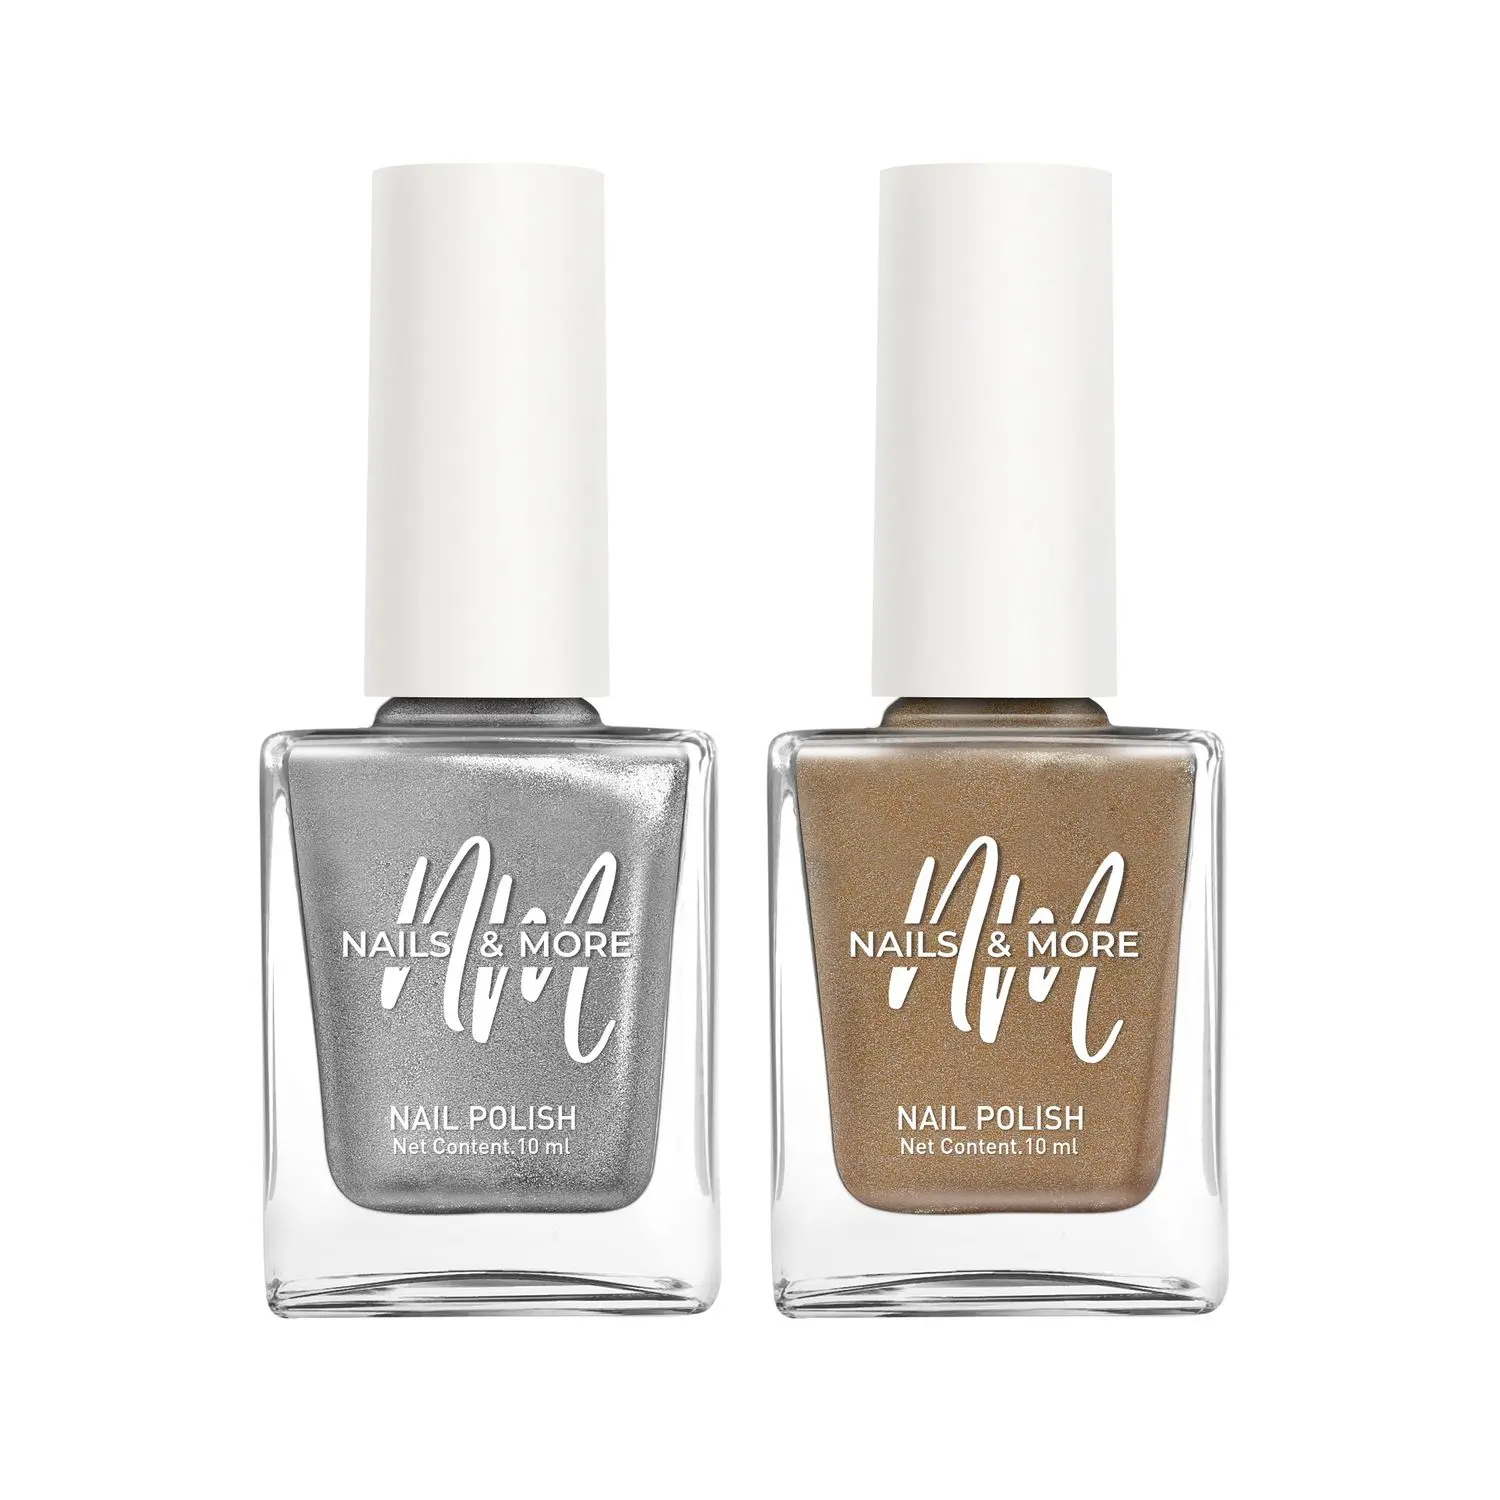 NAILS & MORE: Enhance Your Style with Long Lasting in Metallic Silver - Metallic Gold Pack of 2